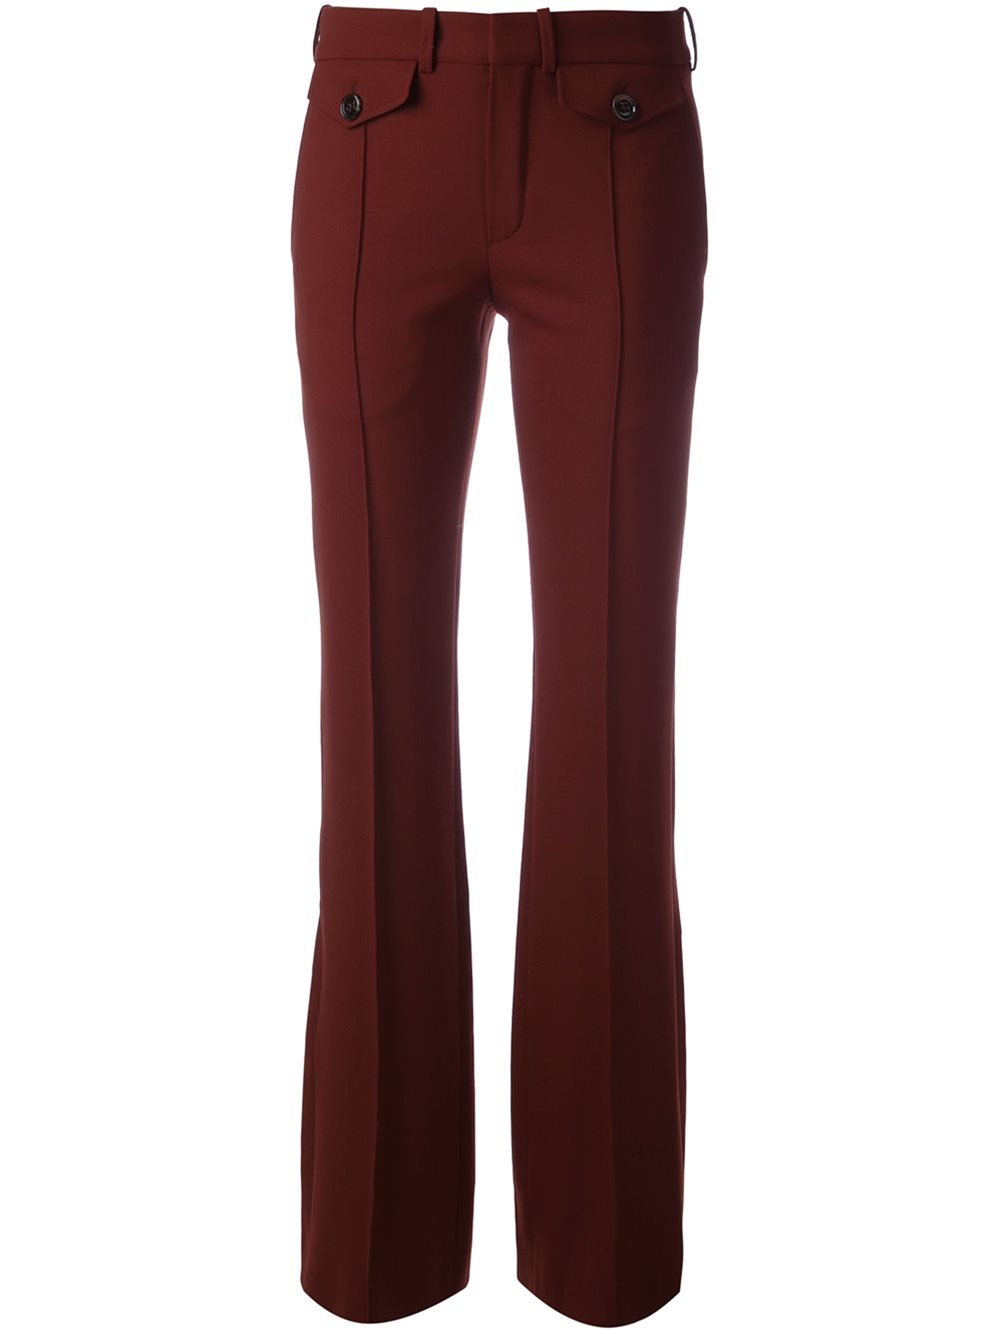 Lyst - Chloé Fitted Flared Trousers in Blue